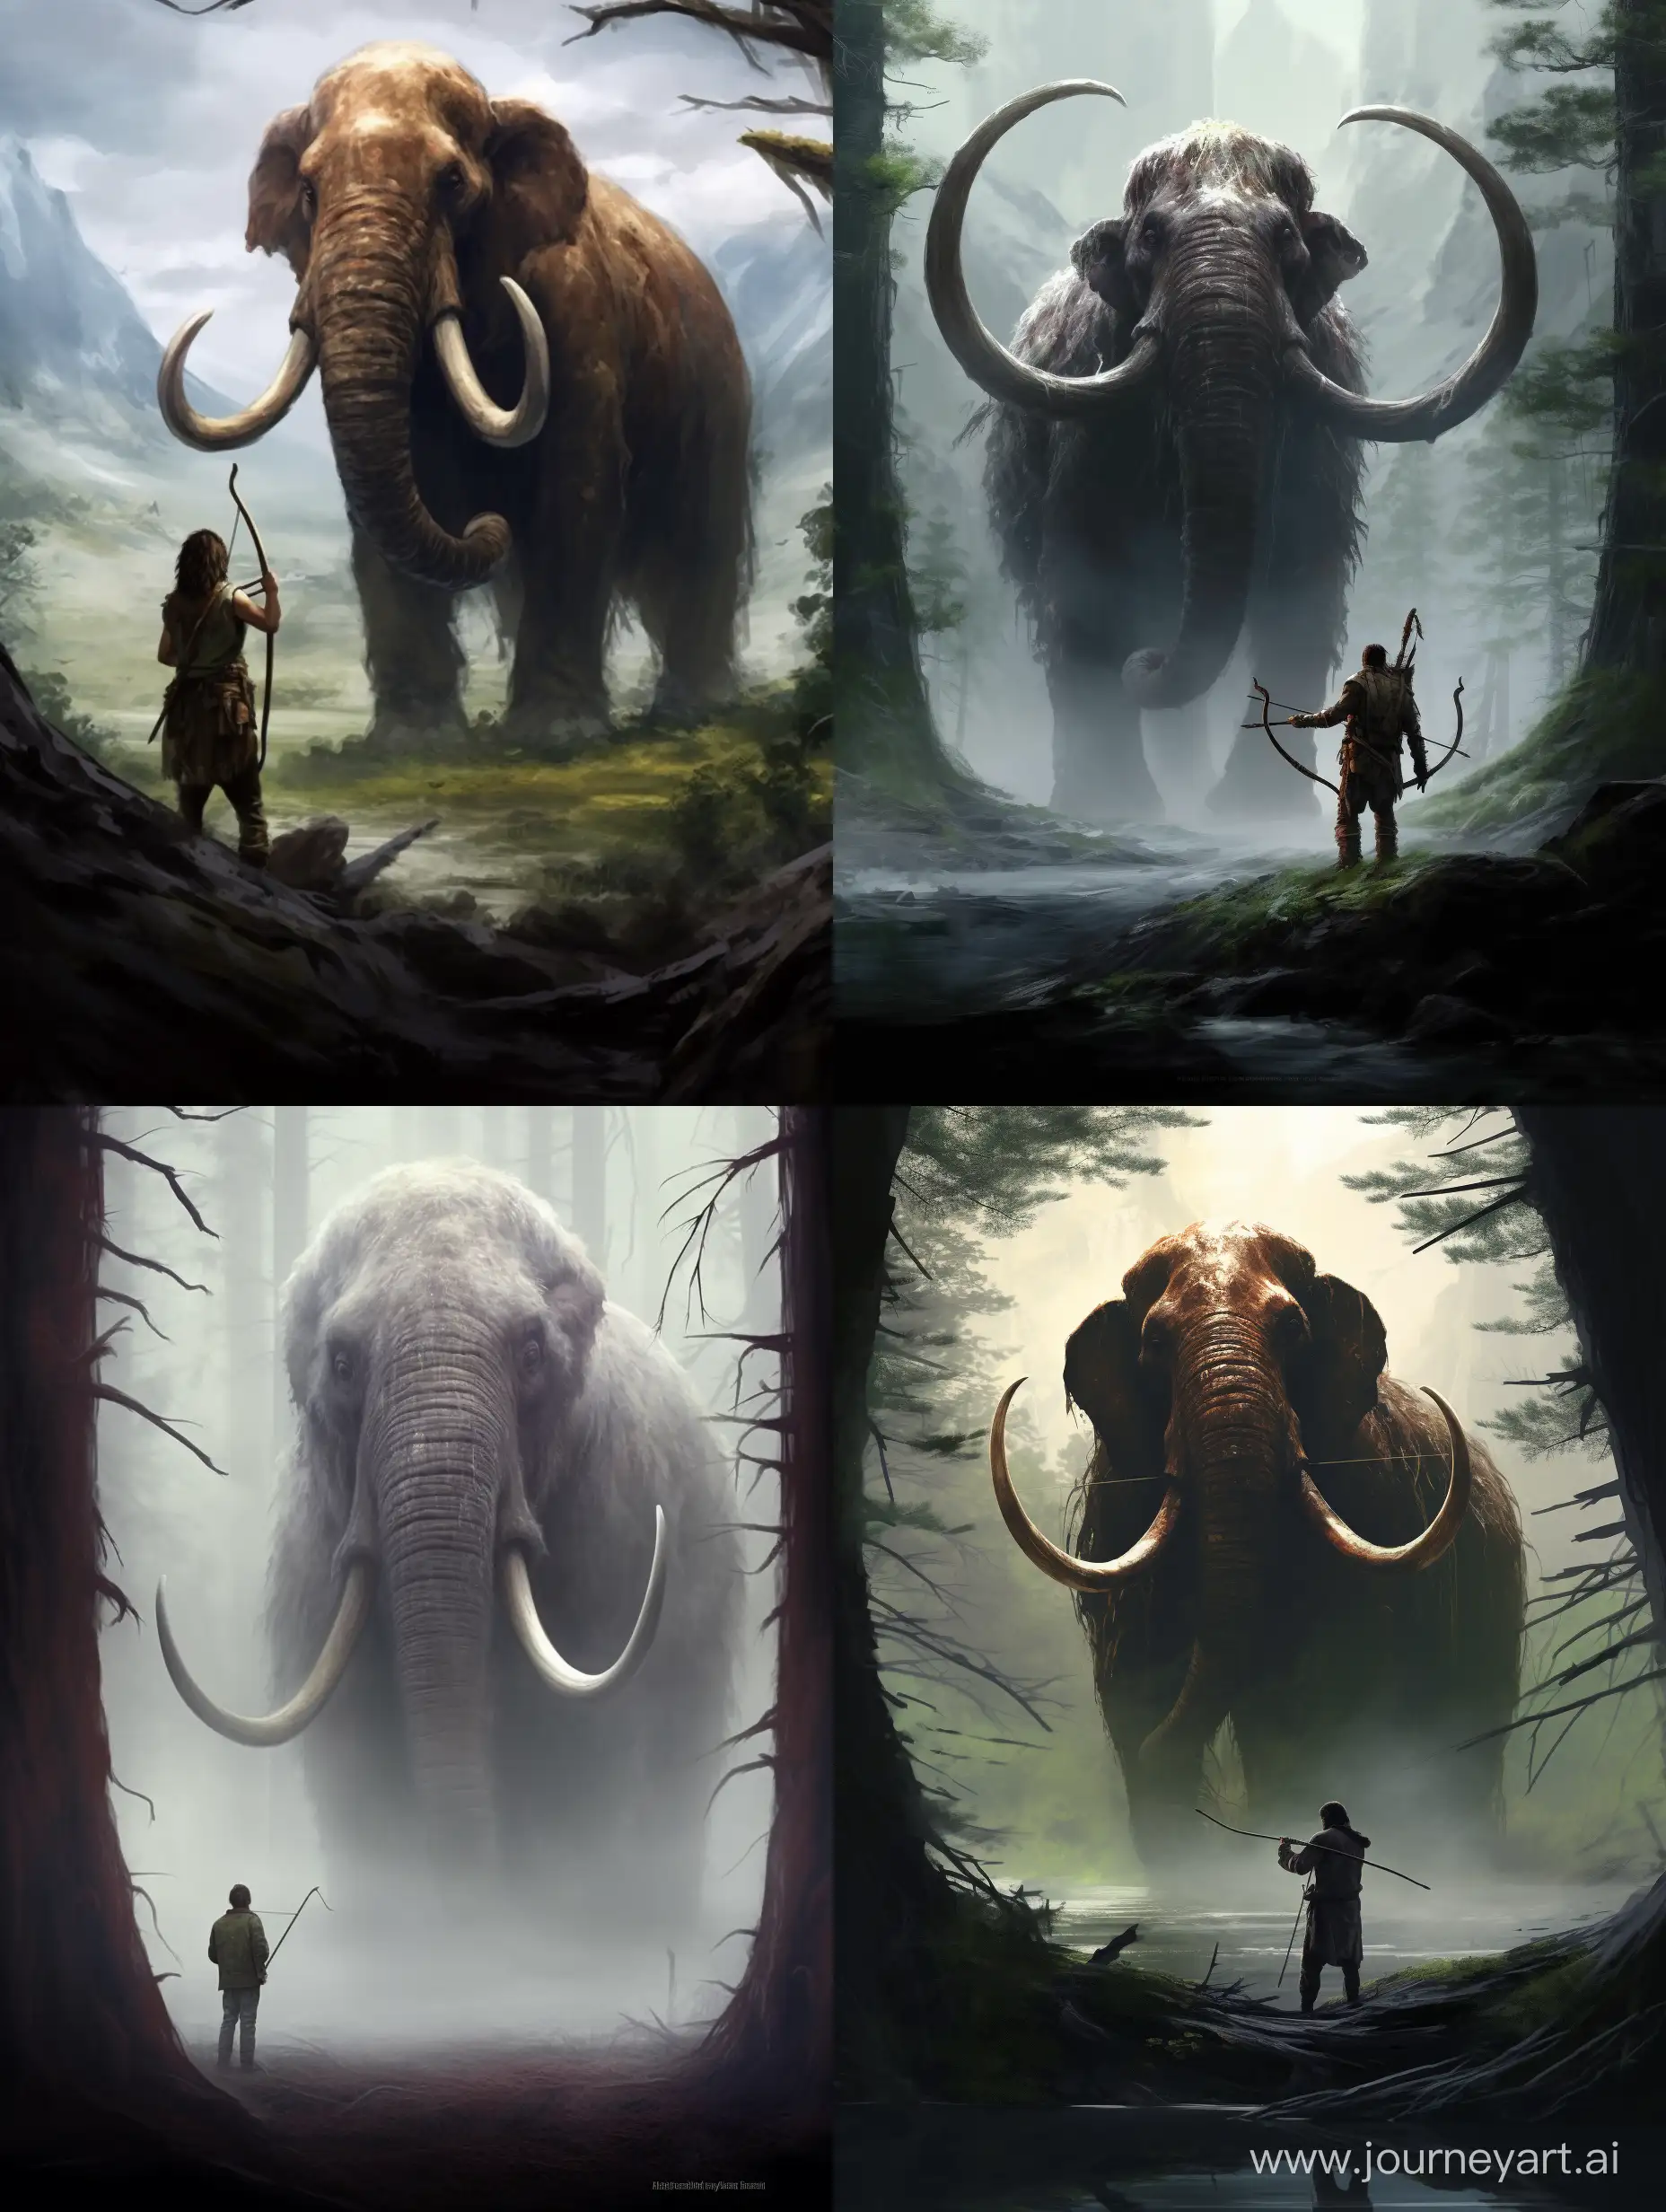 Prehistoric-Hunter-in-Pixar-Style-Pursuing-a-Bowstring-Mammoth